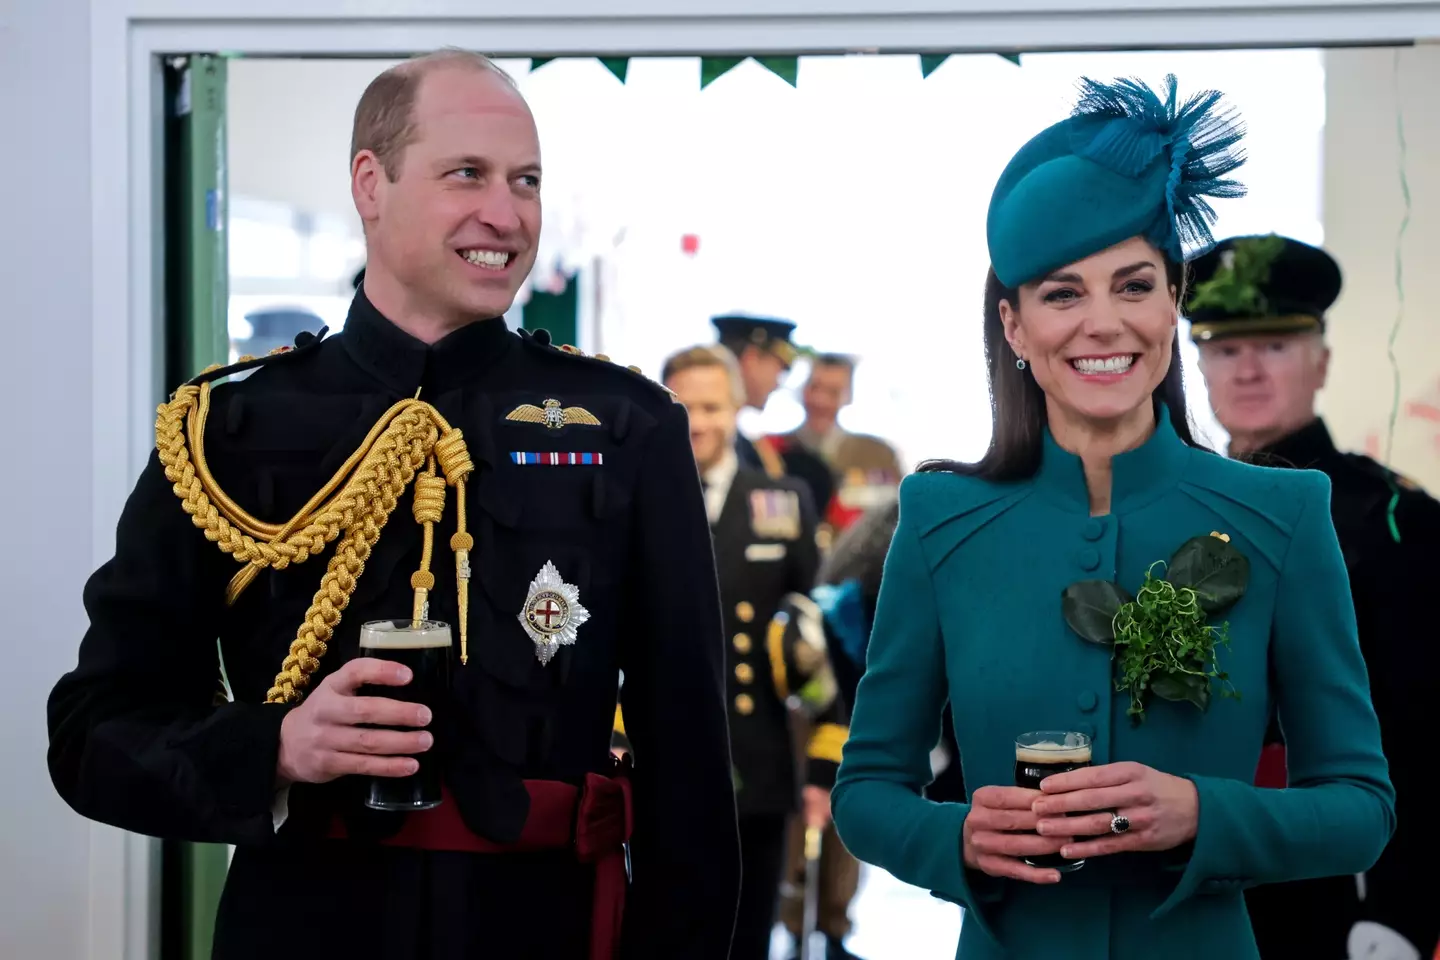 This year, Kate was absent from the Irish Guards parade - she is the honorary colonel of the regiment.